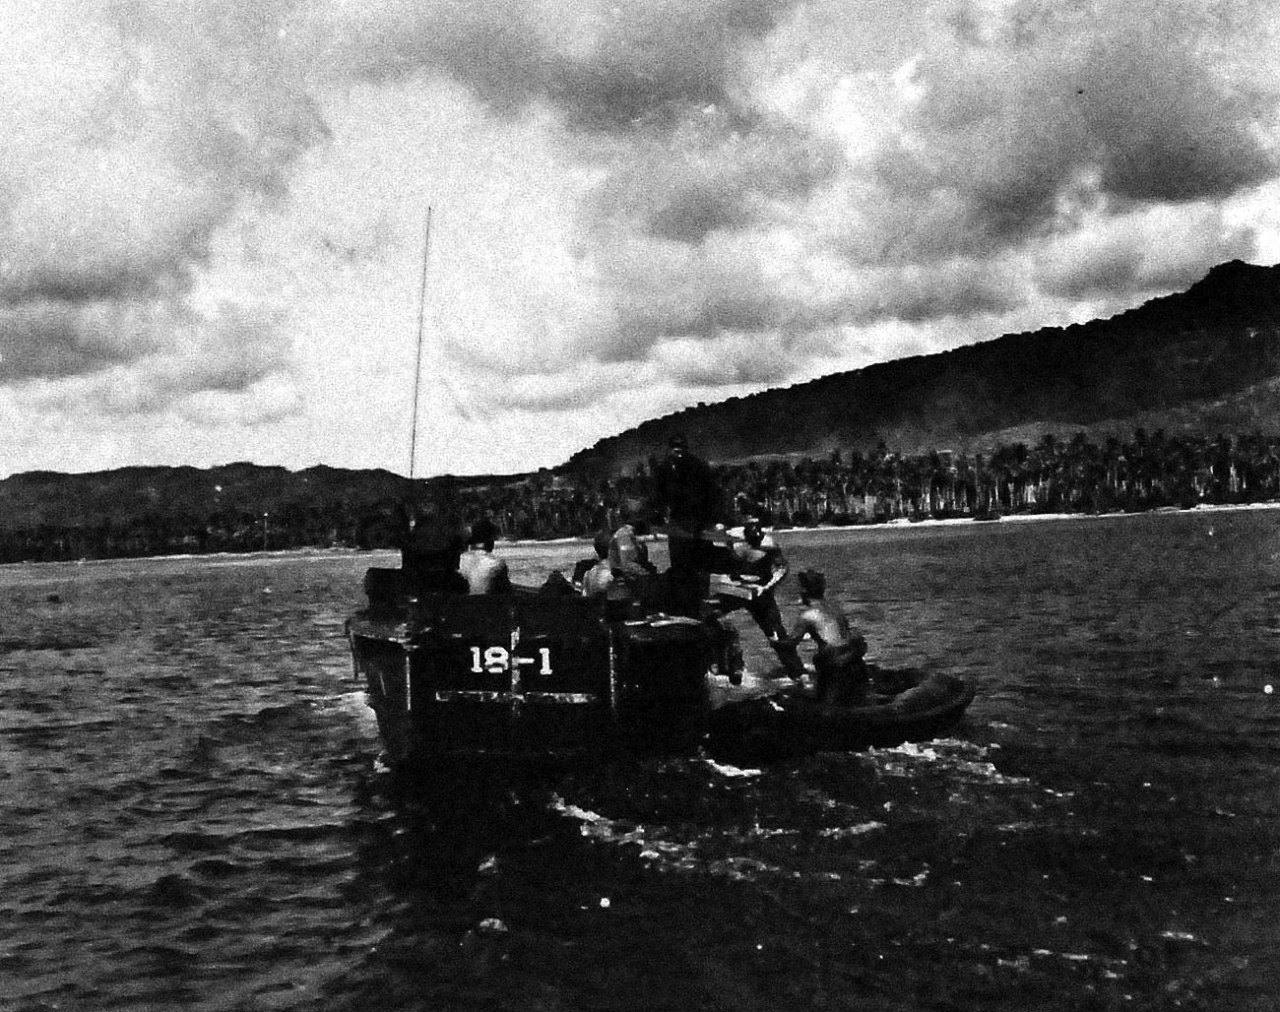 80-G-270819:  Invasion of Guam, July-August 1944.   Underwater Demolition Team on Guam, W-2 Day.   Taken by USS Honolulu (CL 48), received on 3 October 1945.   Image shows the team taking explosive from Higgins boat to rubber boat to be planted in the coral heads and cribs along the beach.  Official U.S. Navy Photograph, now in the collections of the National Archives.   (2013/9/13).